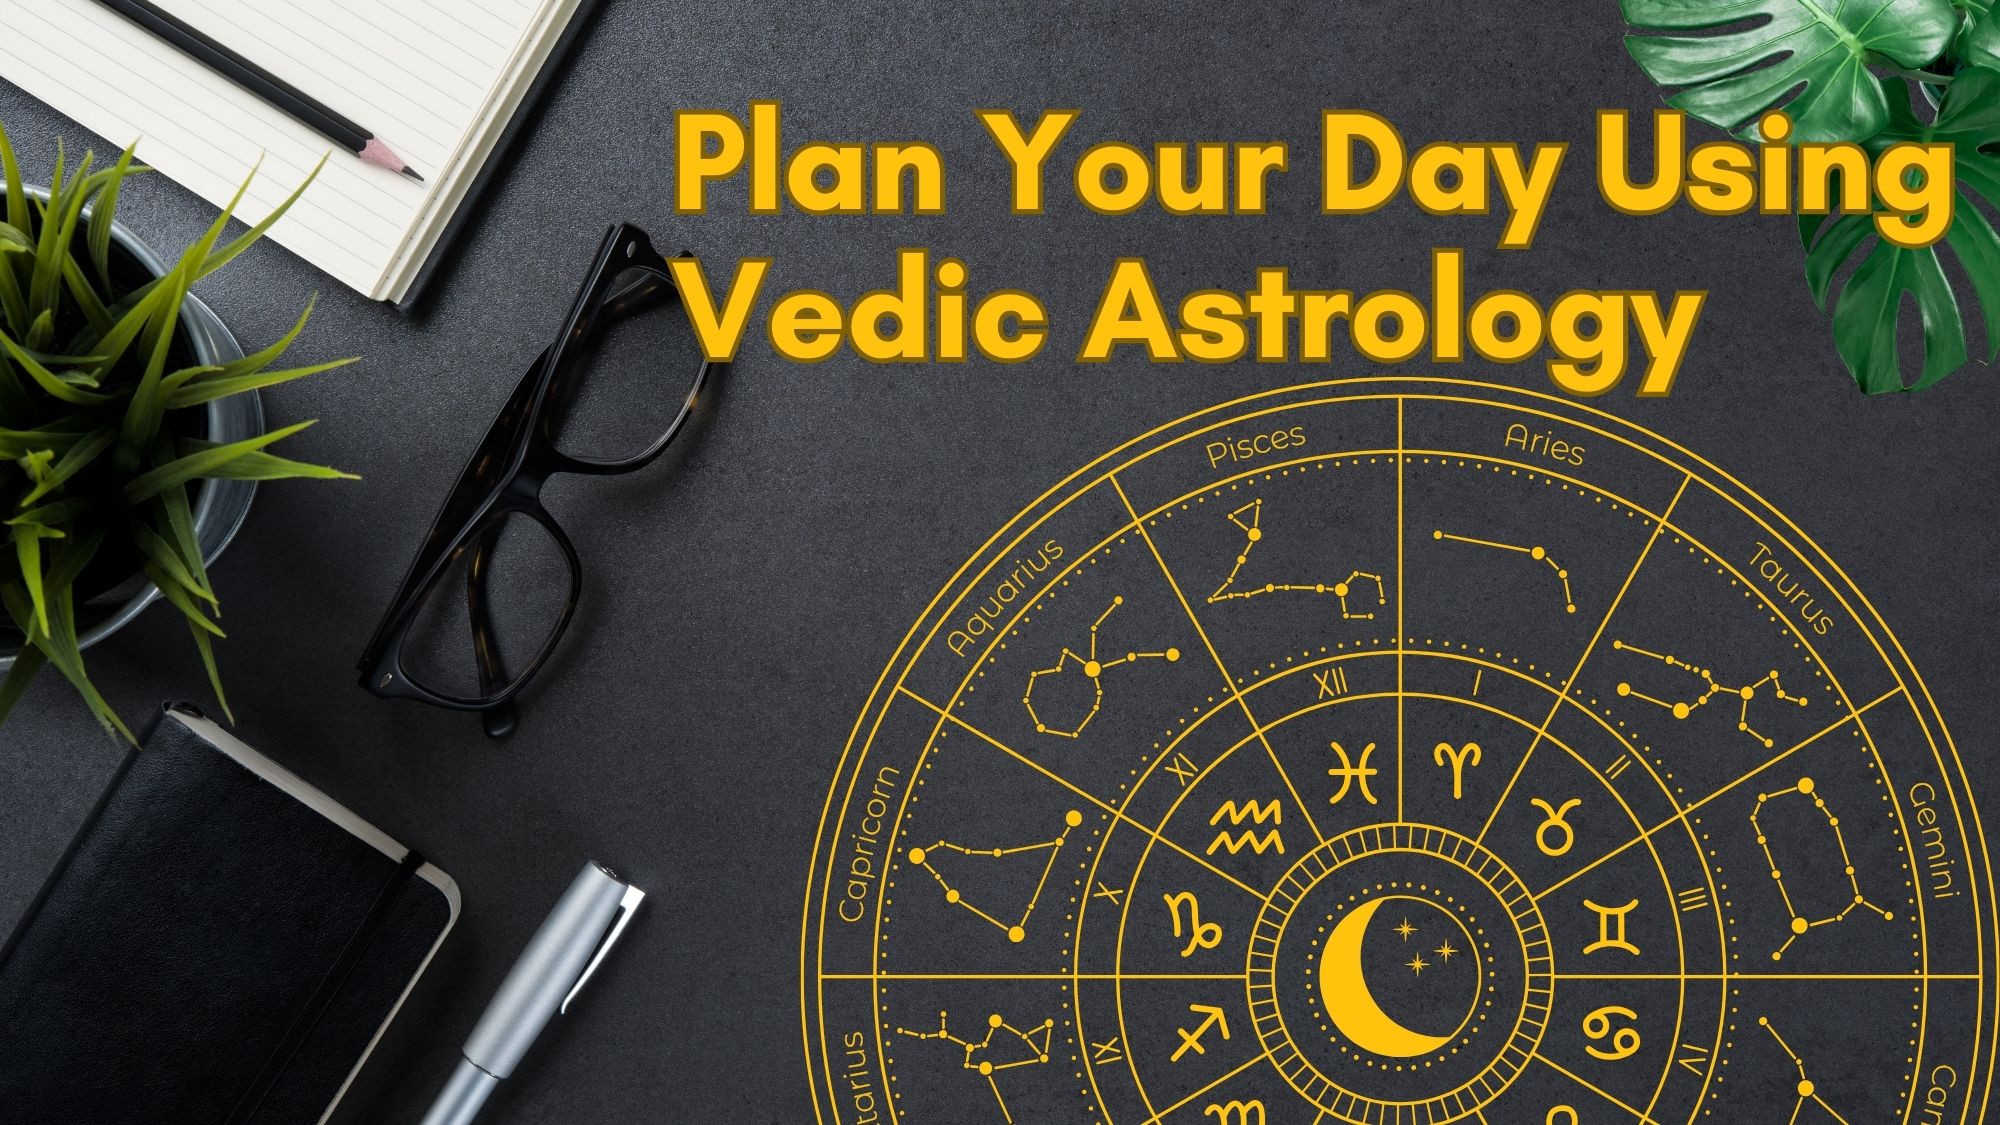 Plan your day using Vedic astrology